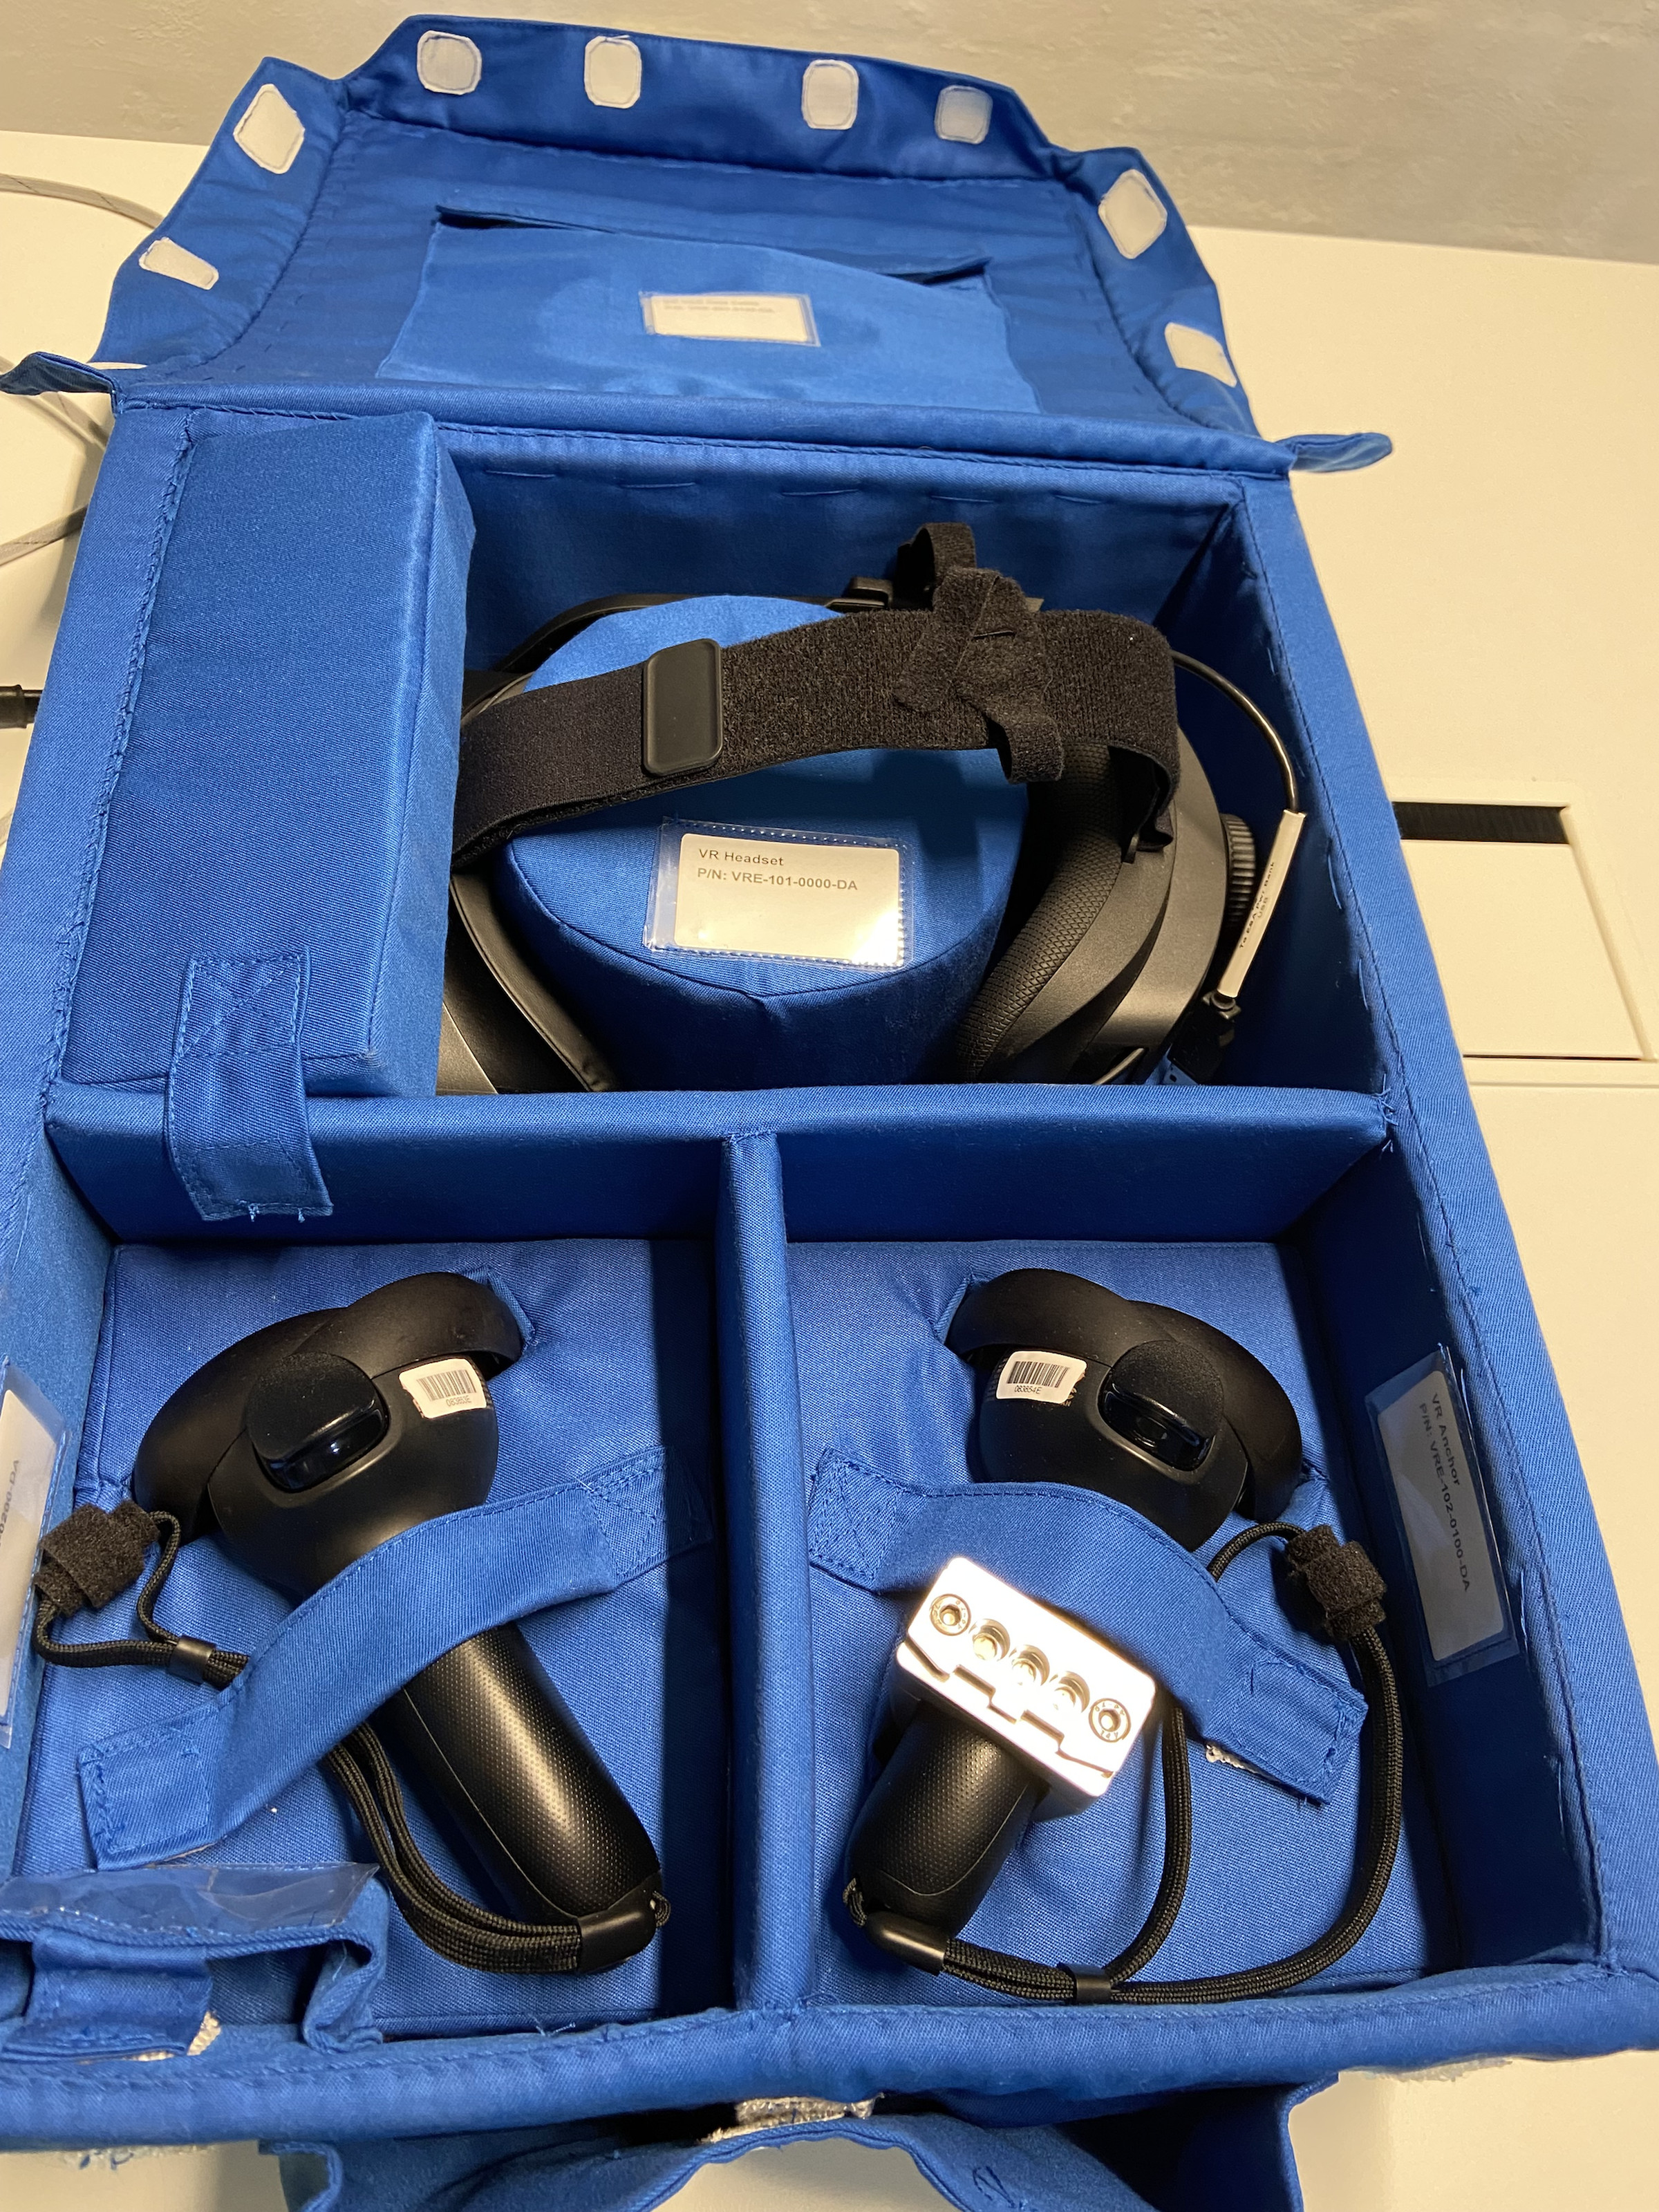 The Vive Focus 3 and its controllers packed in a blue bento-style box, with each component strapped down.